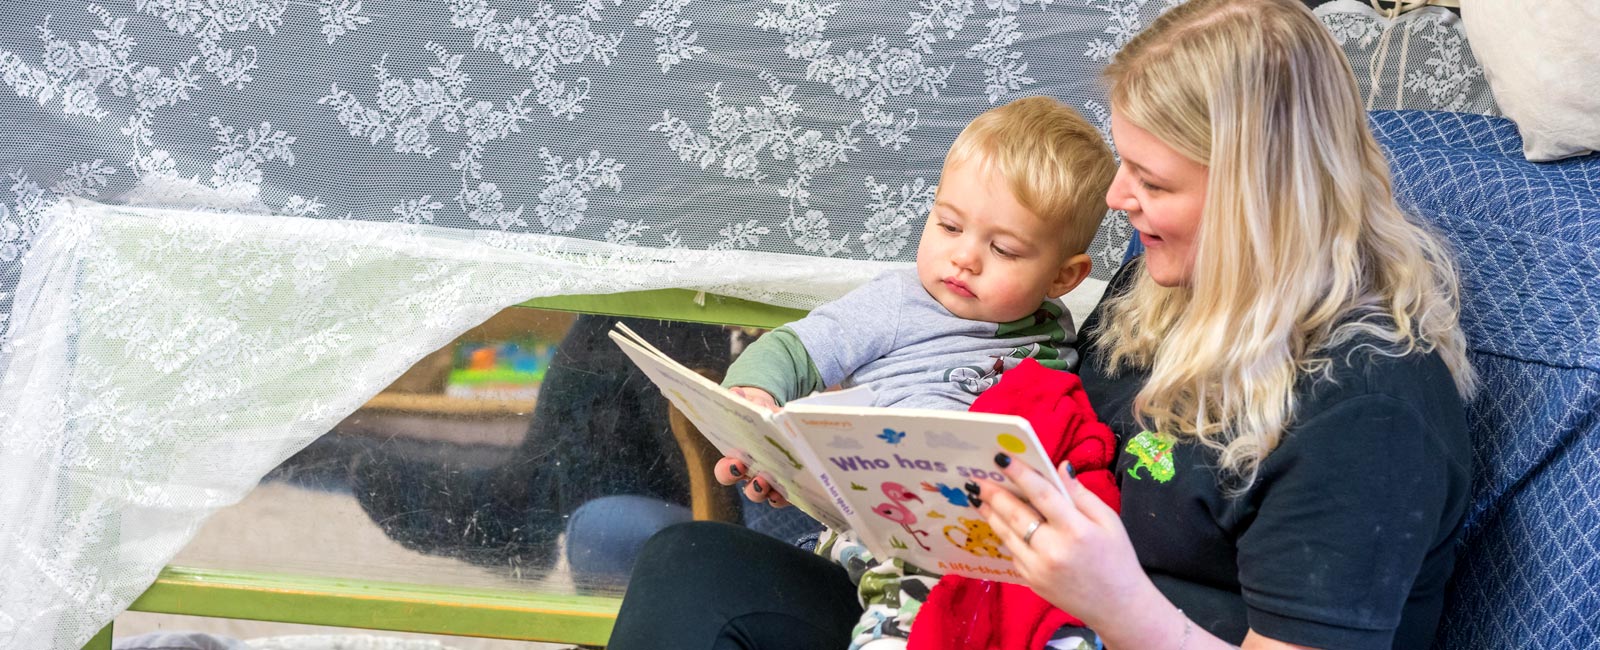 One of our childcare professionals reading with an under-five child.